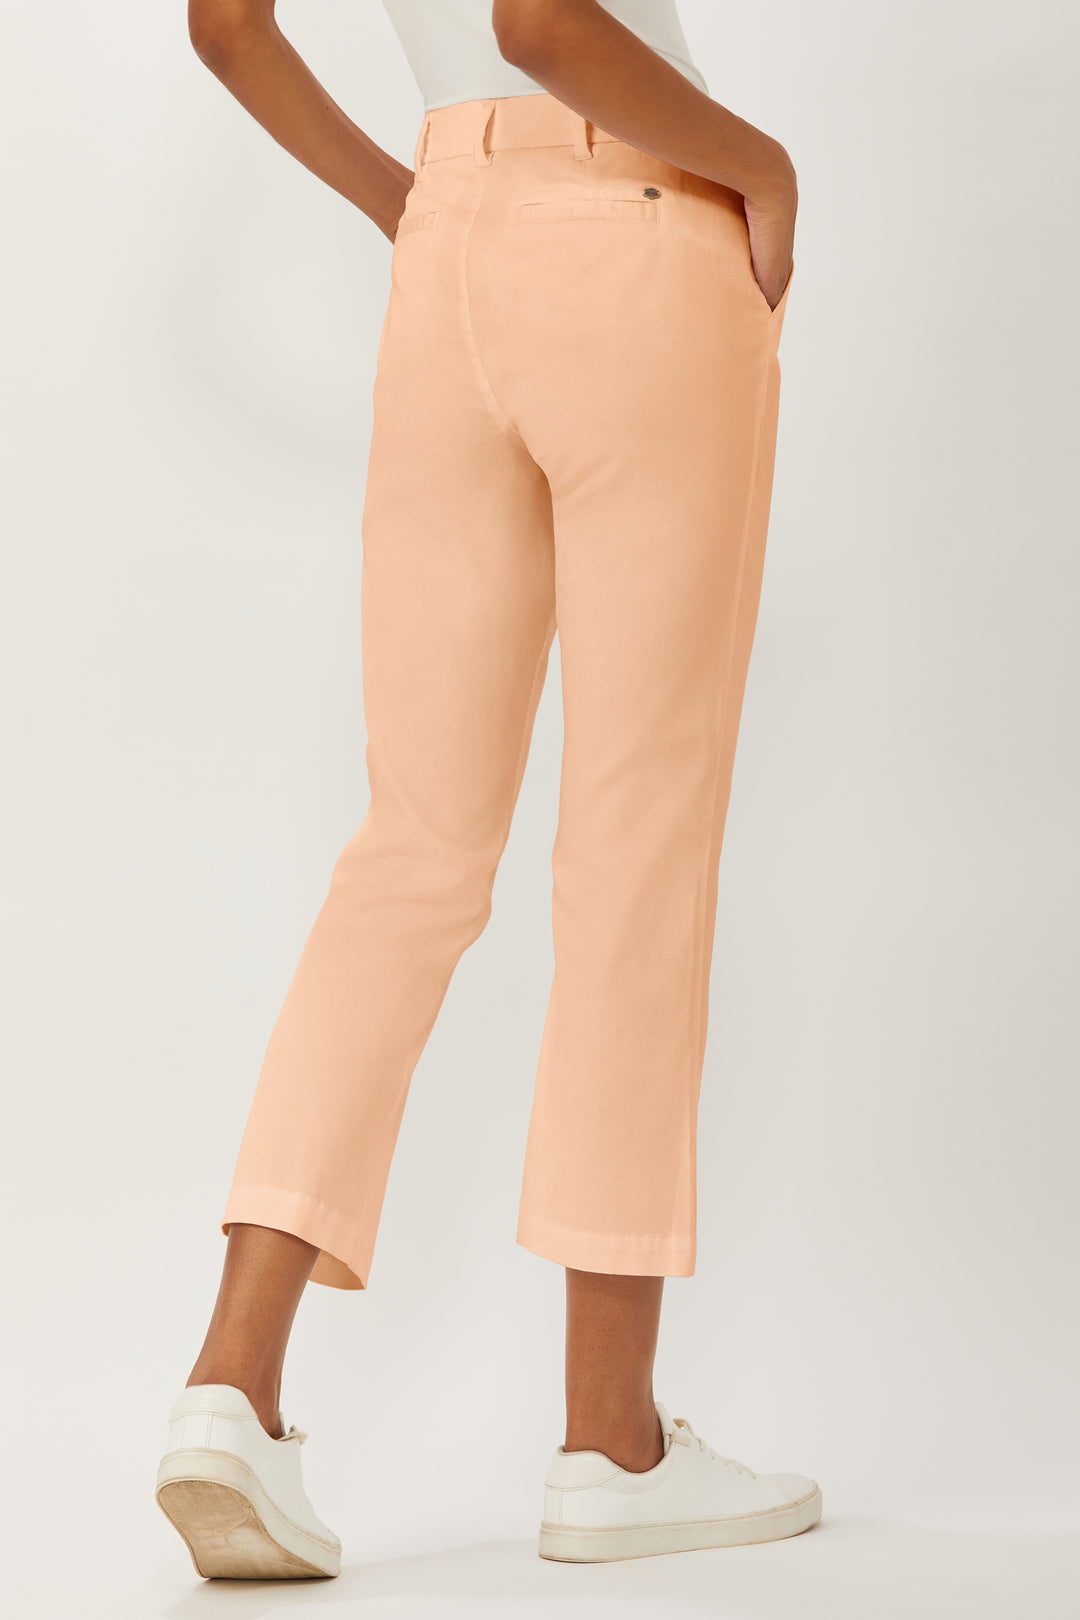 Stills Cropped Flare Pant - Apricot